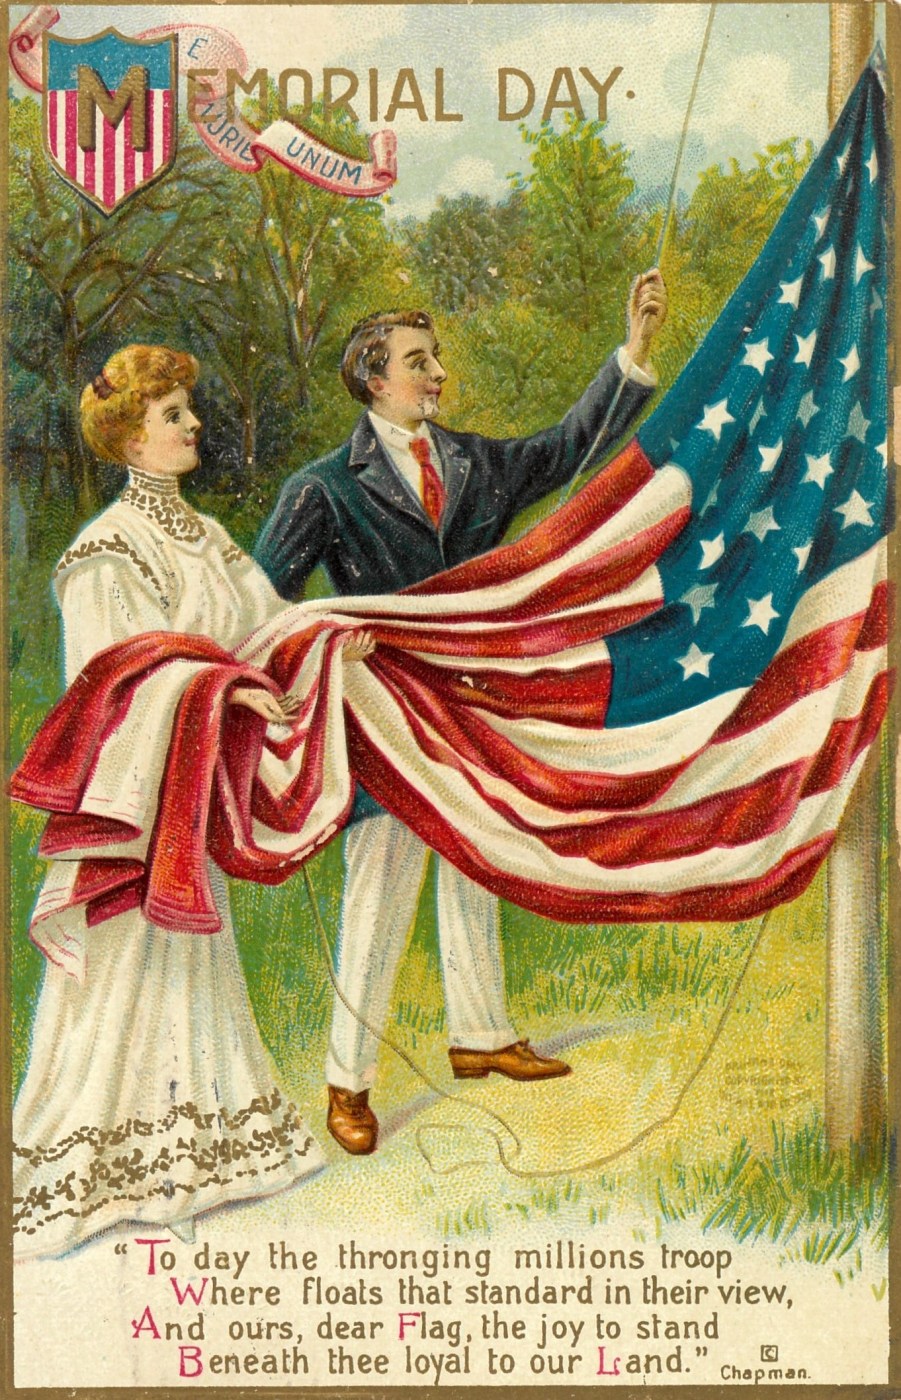 “Memorial Day,” signed Chapman, International Art Publishing Co., New York/Berlin. Cancelled May 30, 1909. Verse by Margaret E. Sangster, “Our Flag.” (NCA)